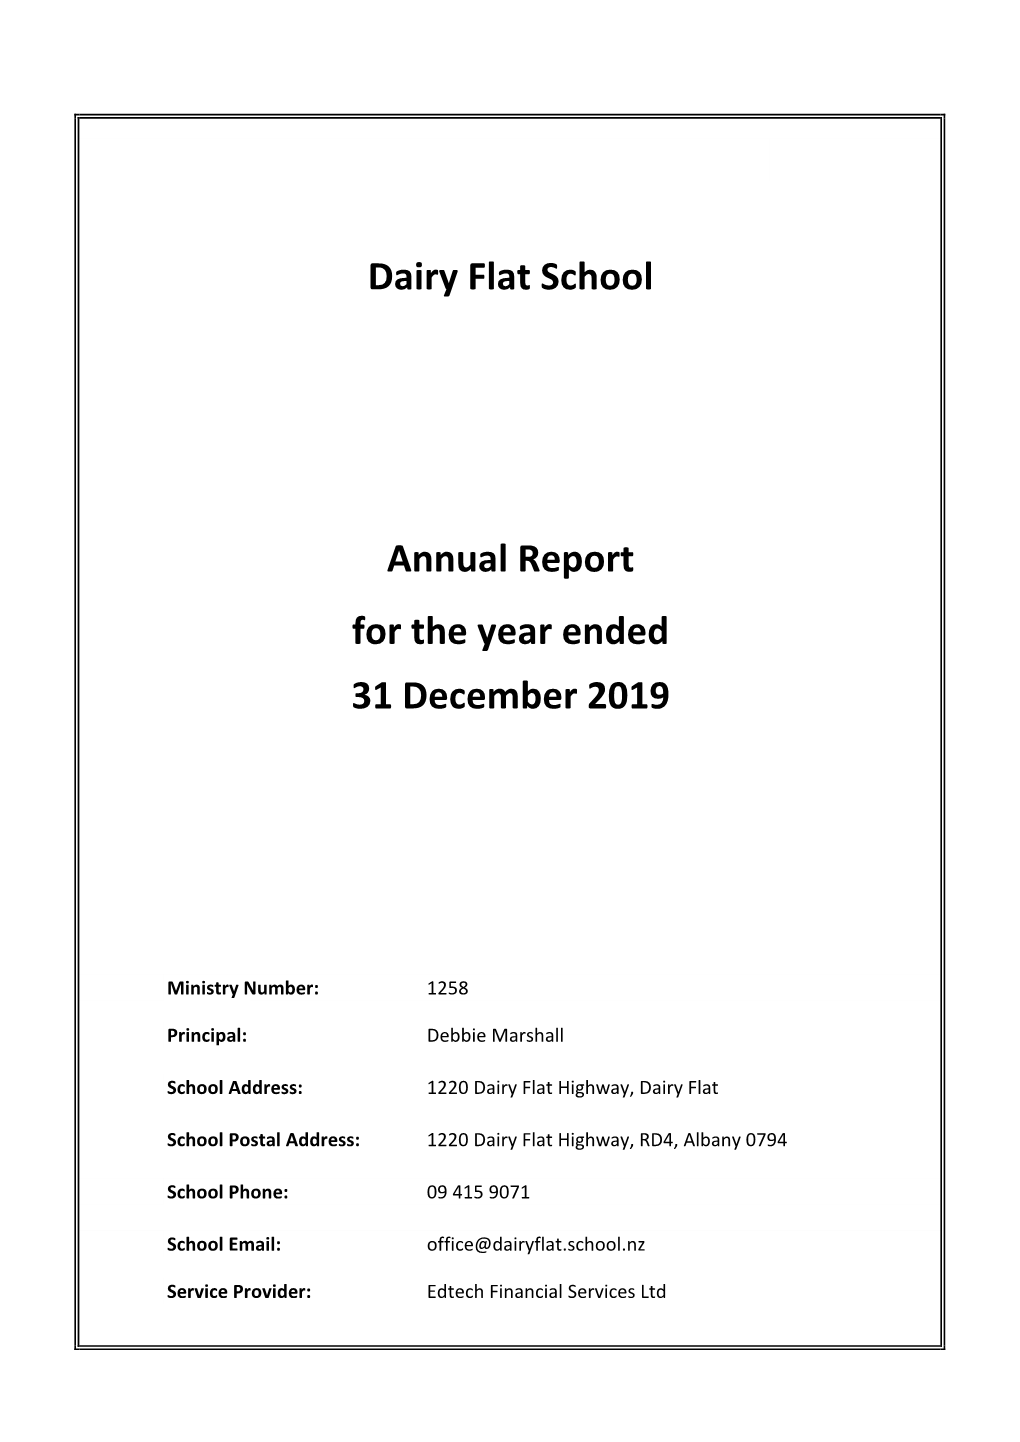 Dairy Flat School 31 December 2019 for the Year Ended Annual Report